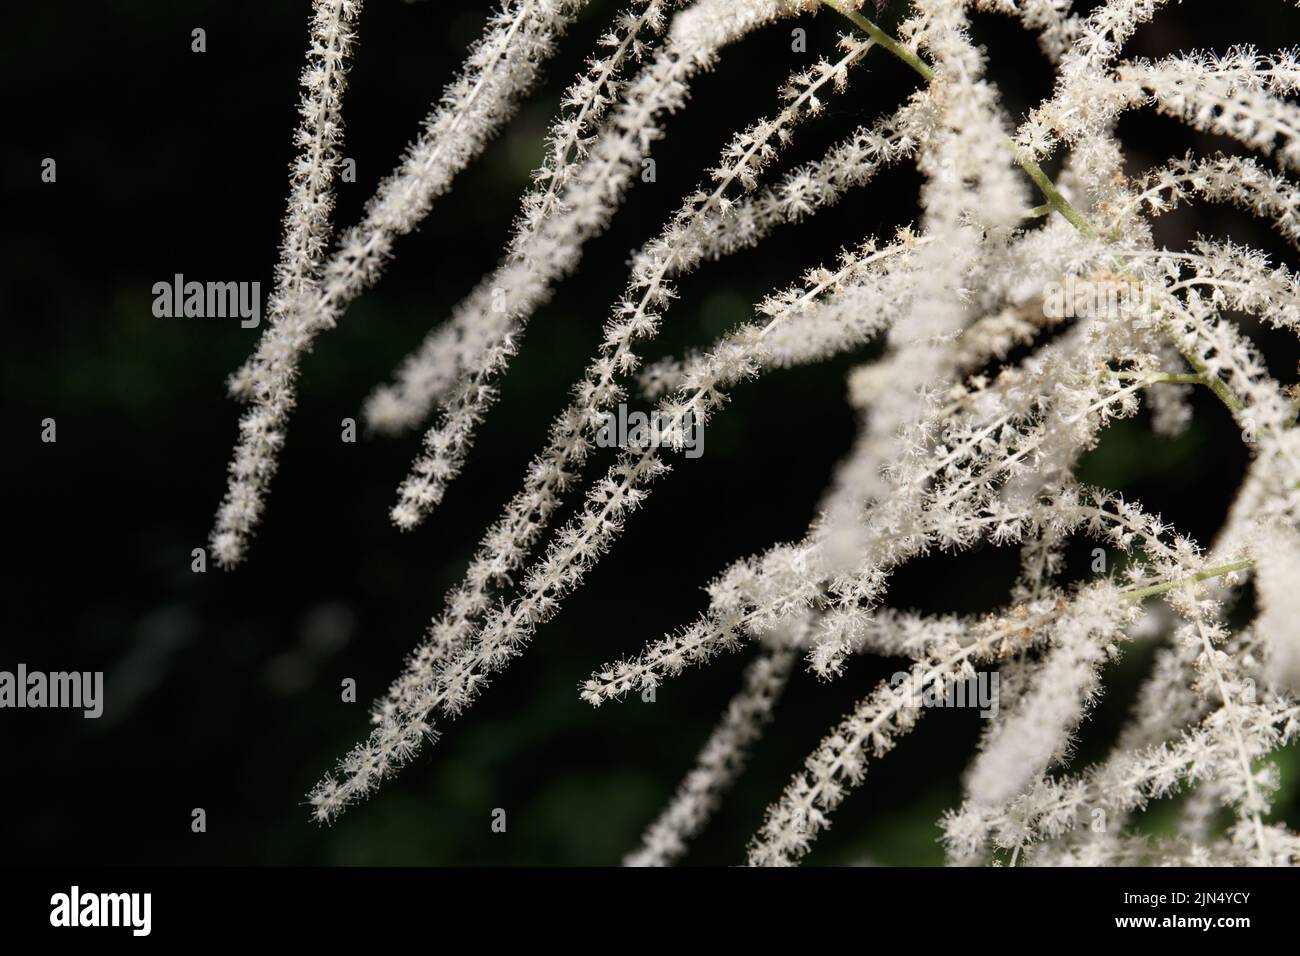 Aruncus dioicus, close-up, selective focus, known as goat's beard, buck's-beard or bride's feathers, a flowering herbaceous perennial plant Stock Photo